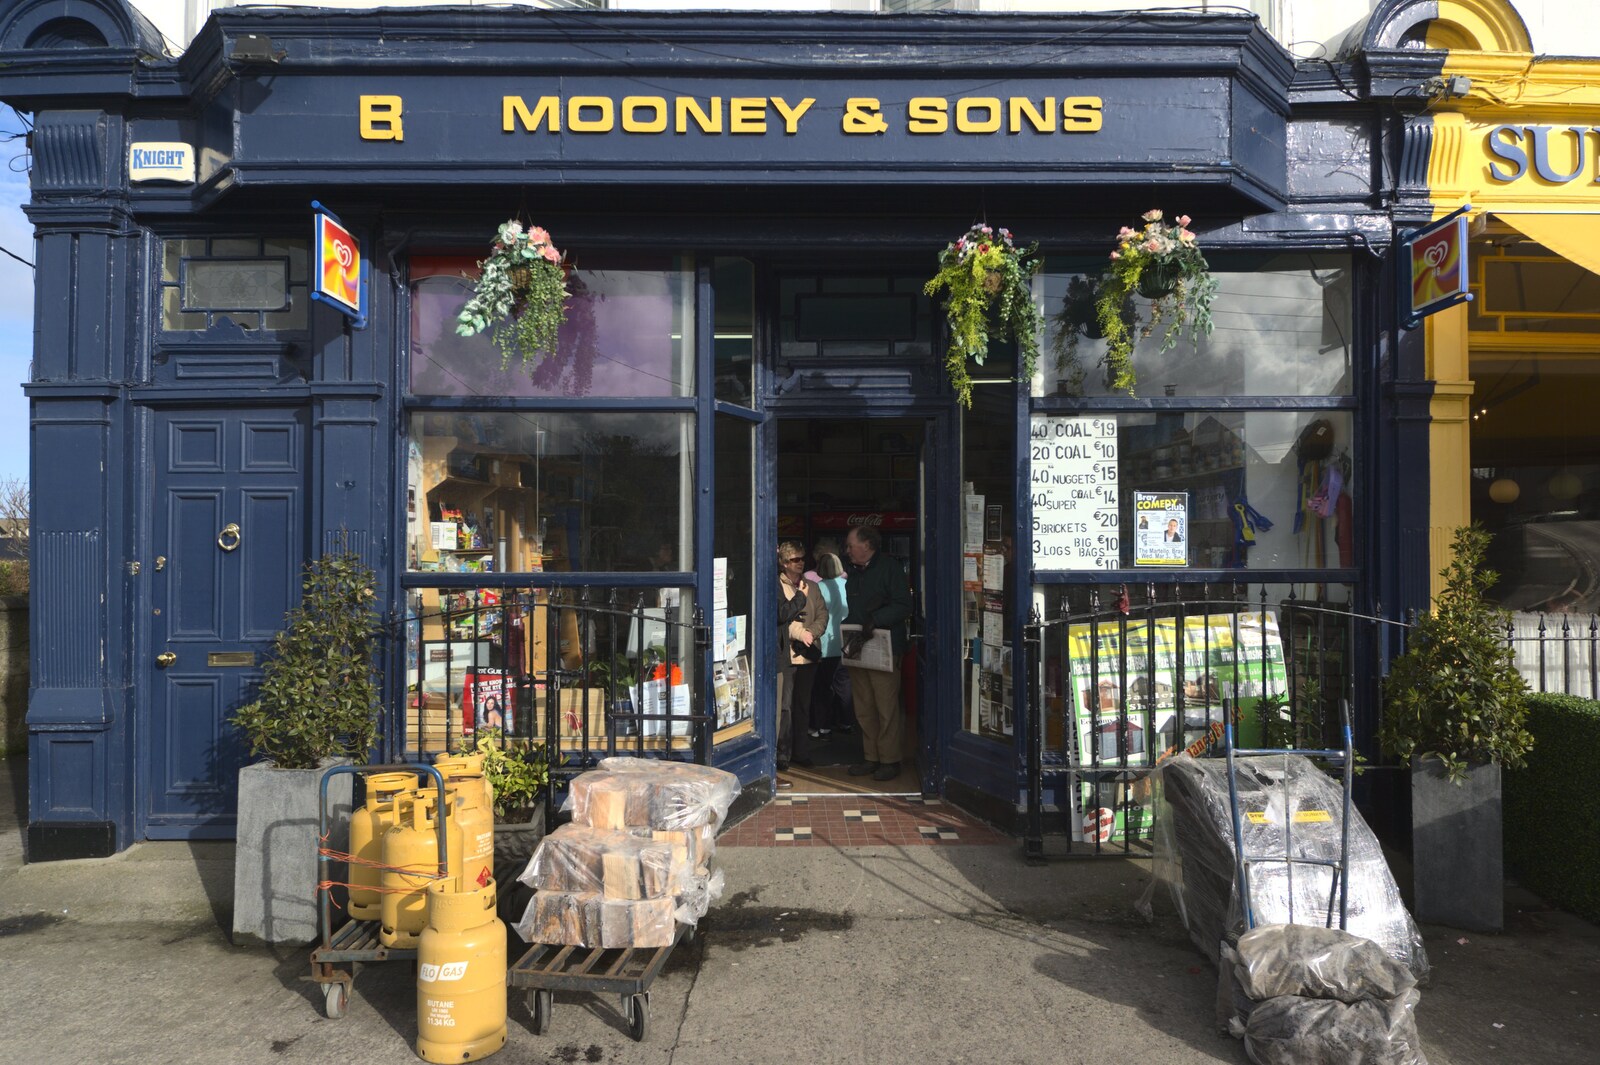 Mooney and Sons hardware store in Greystones from A Day in Greystones, County Dublin, Ireland - 28th February 2010